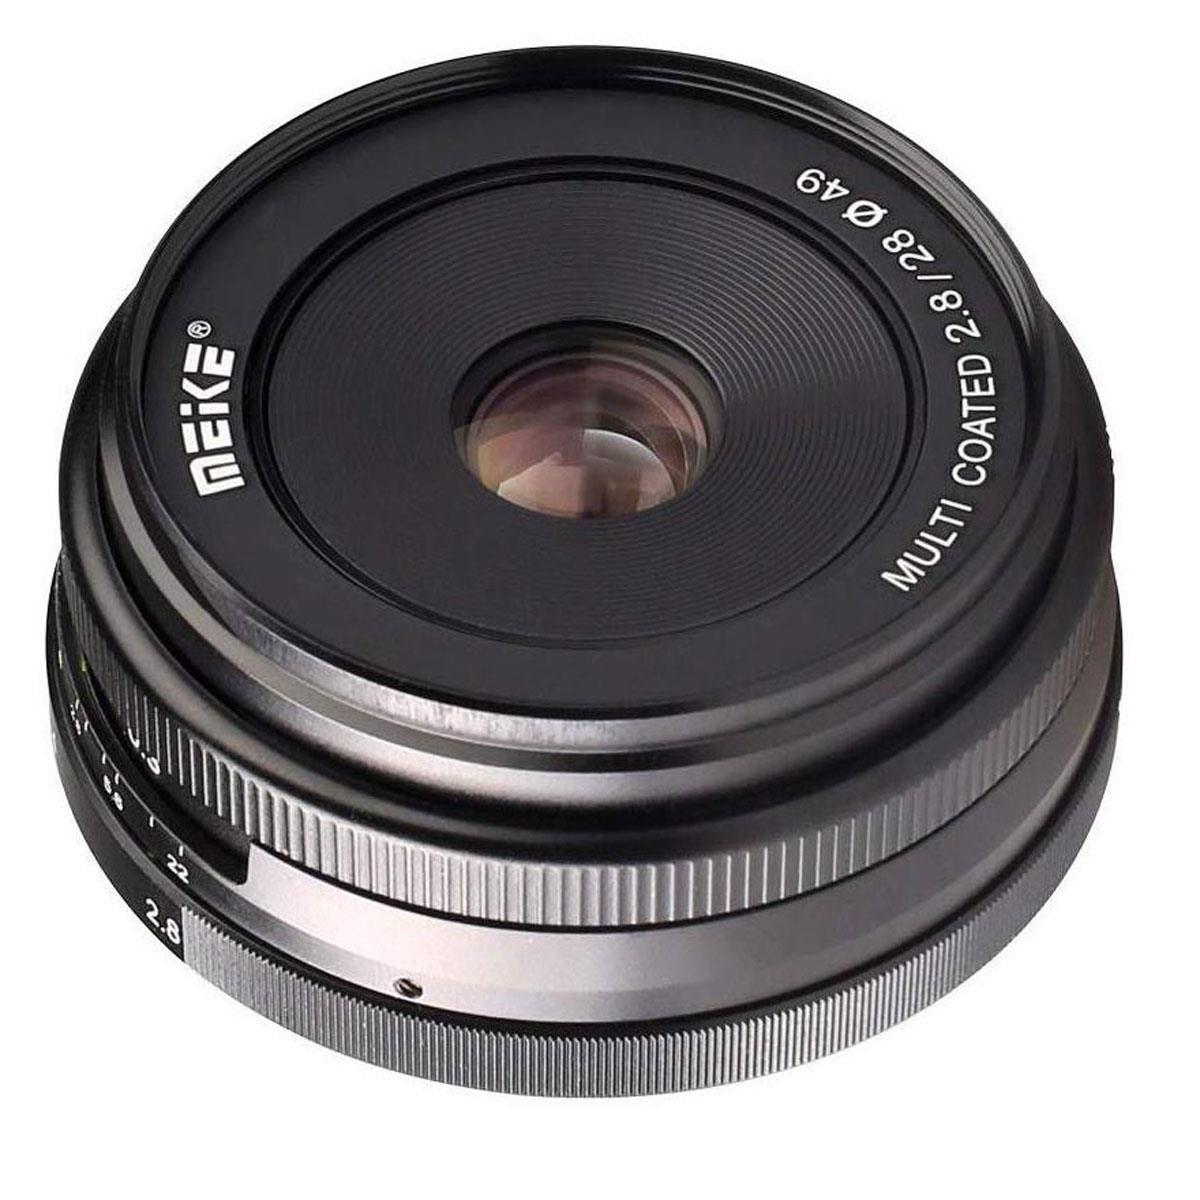 Image of Meike 28mm f/2.8 Lens for Micro Four Thirds